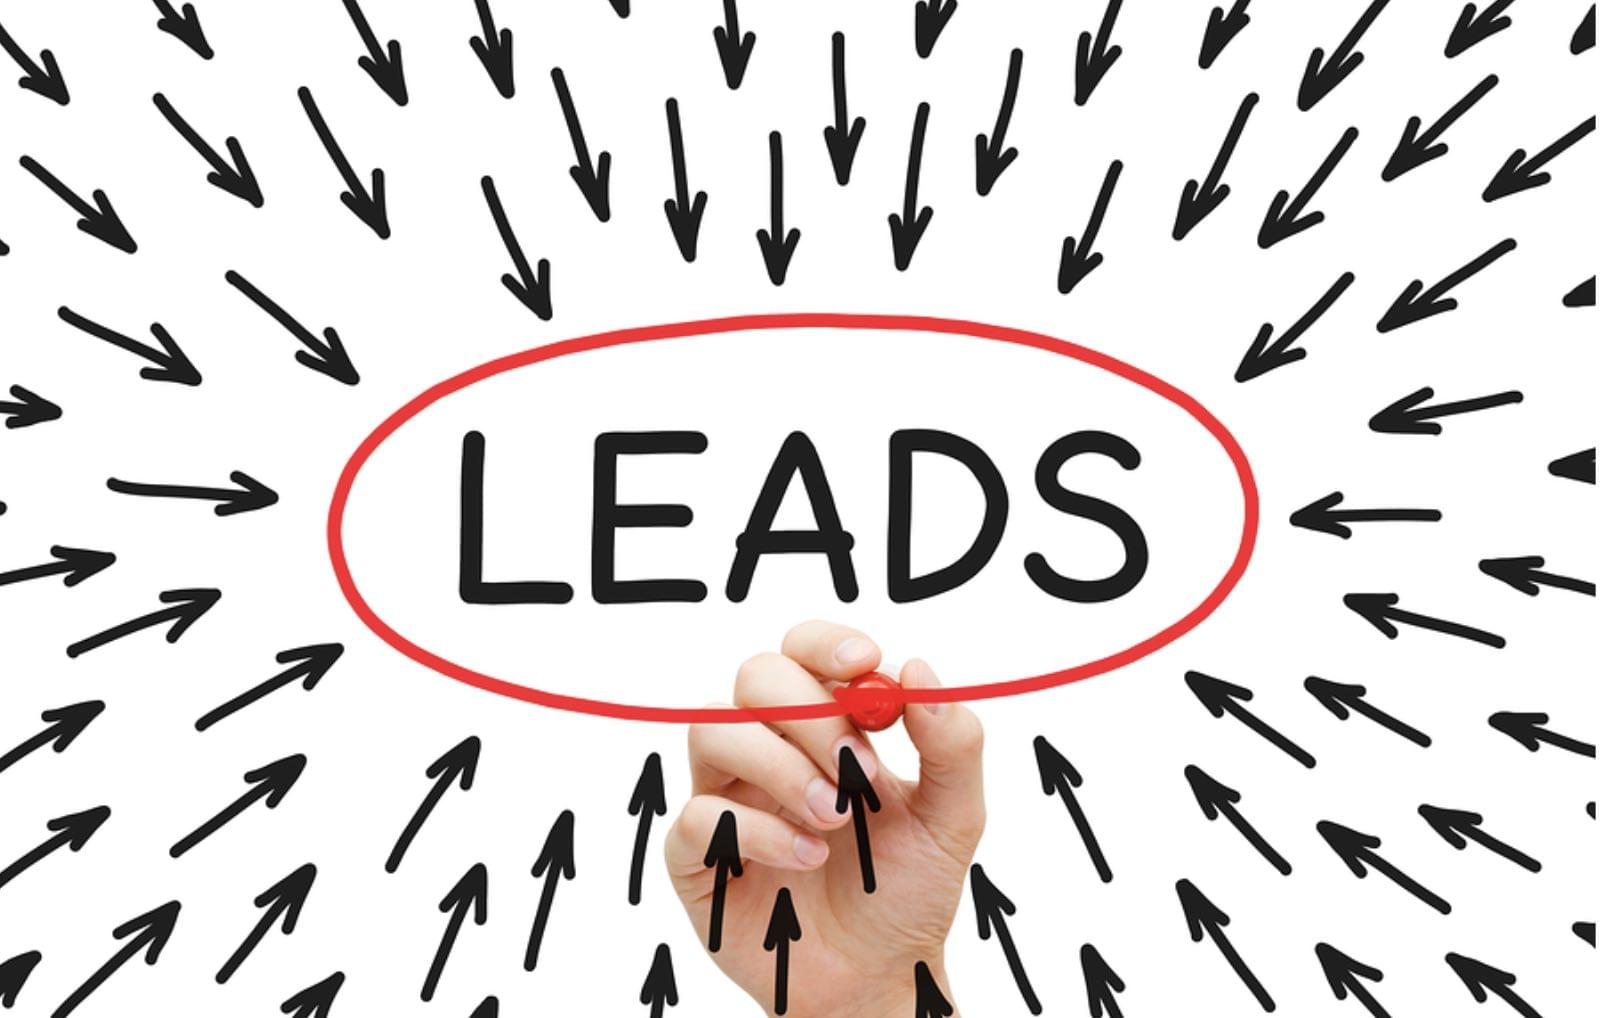 Leads marketing attraction